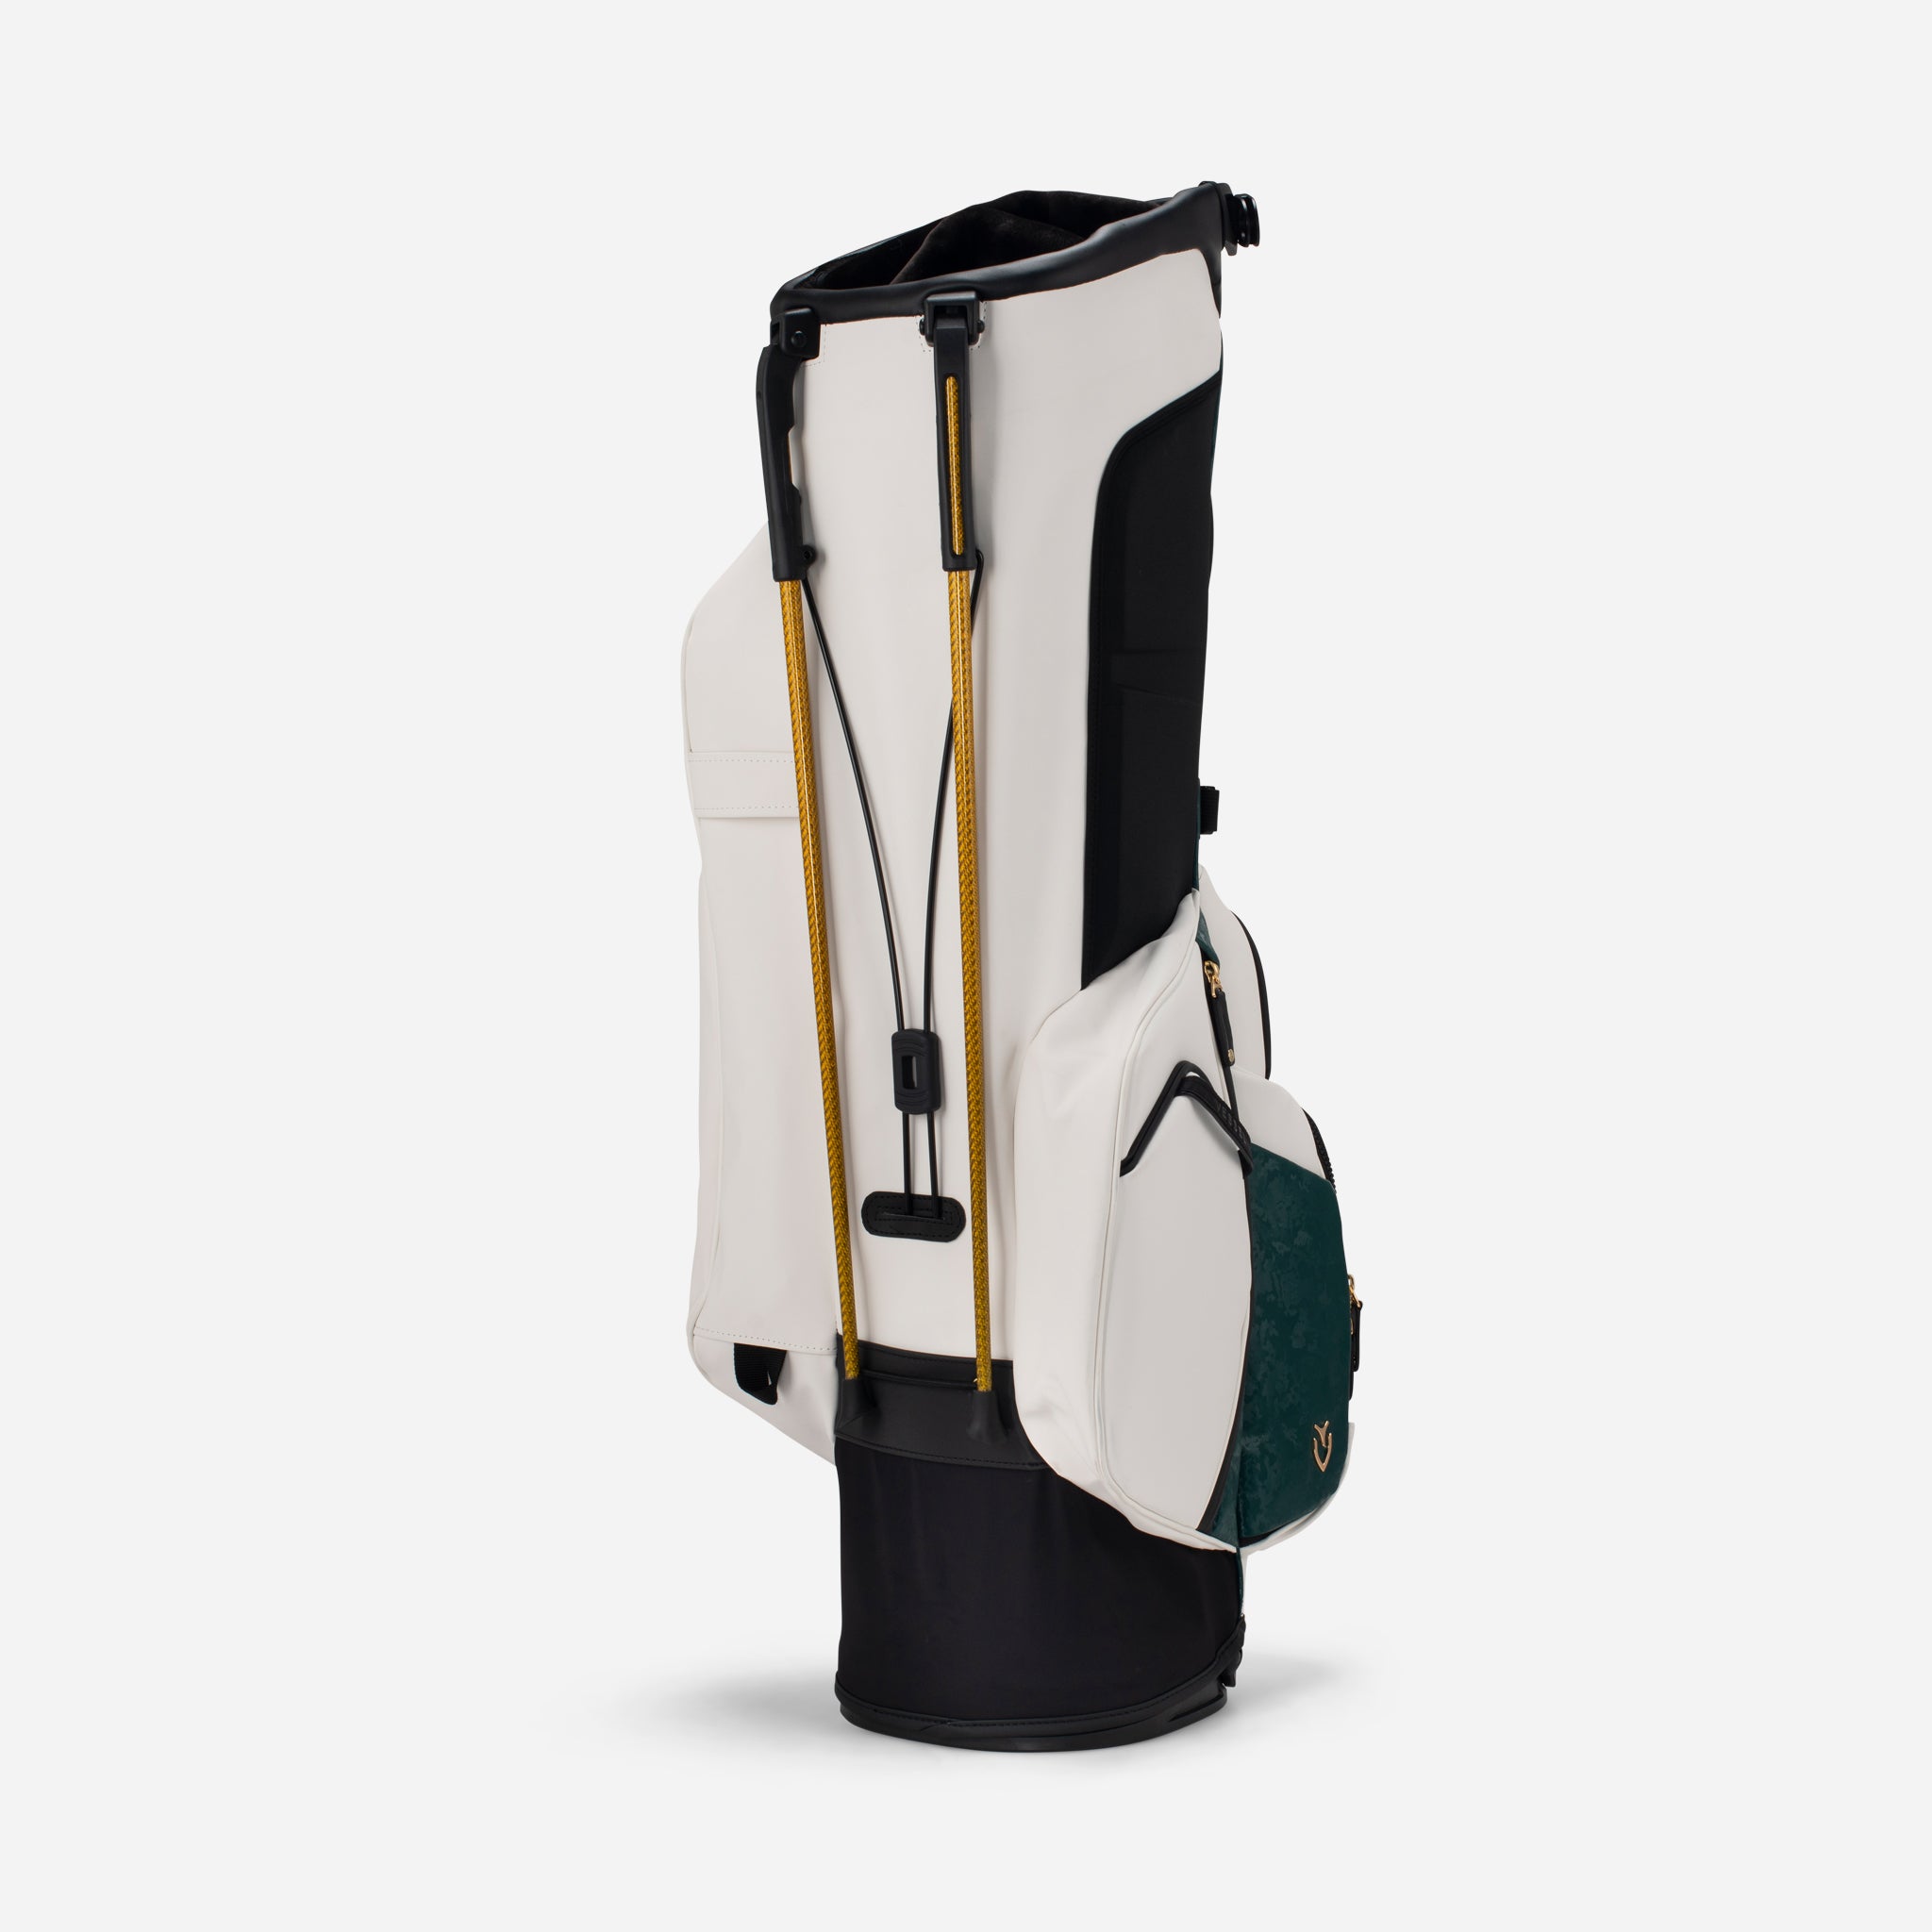 2023 Season Opener Player IV Pro Stand | Limited Edition Golf Bag